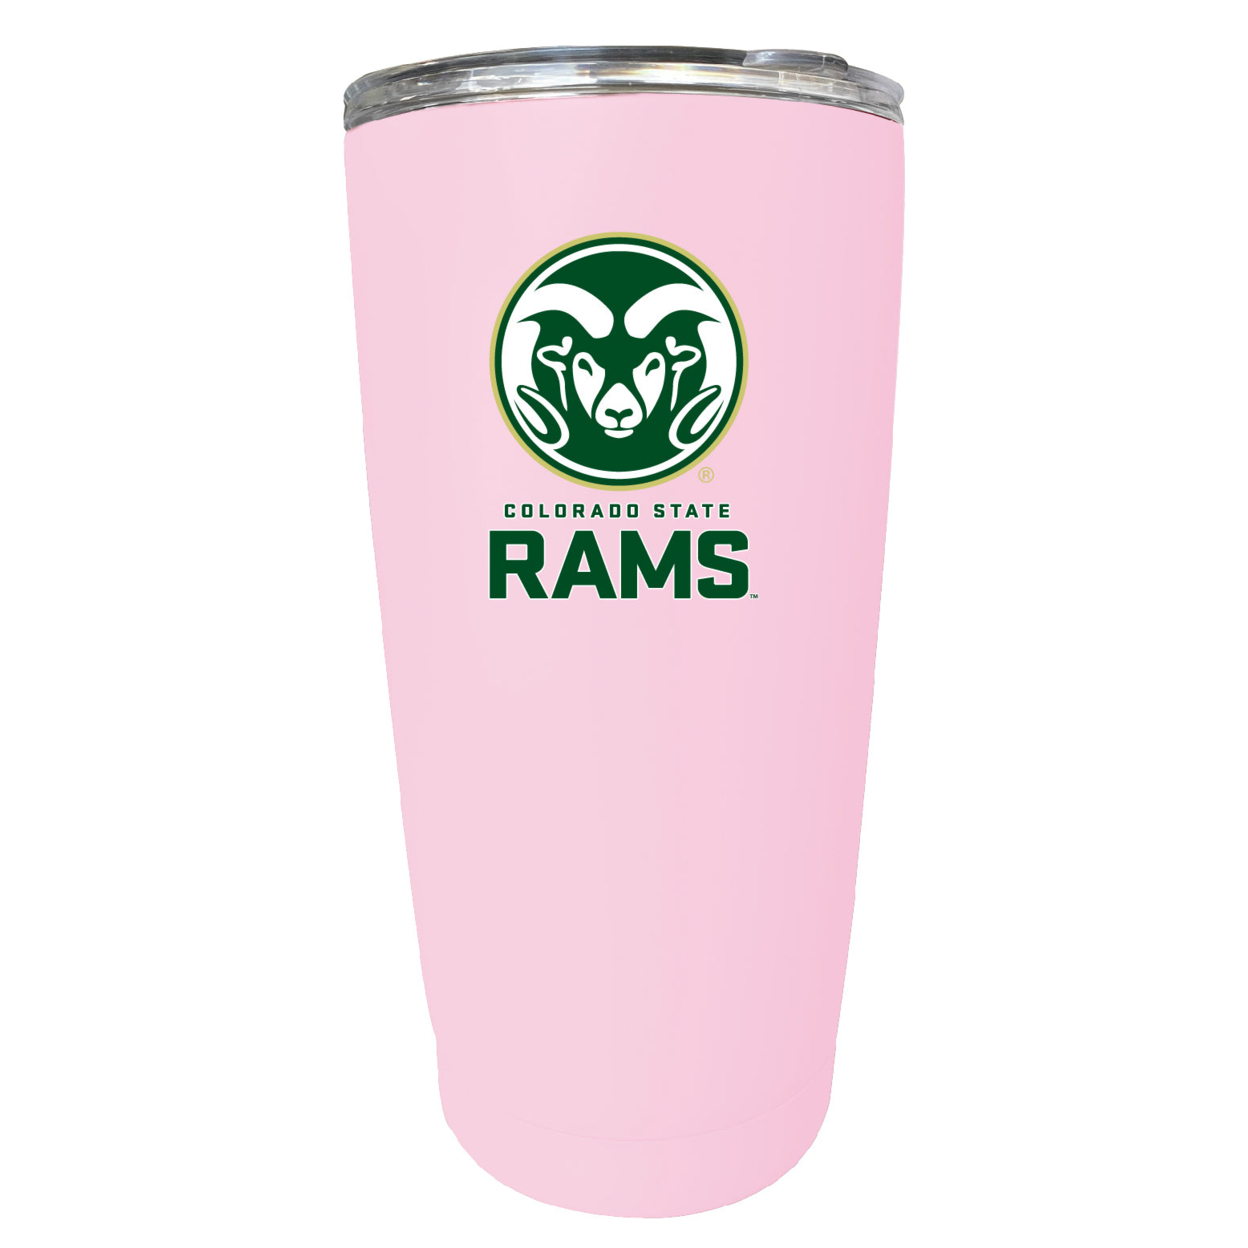 Colorado State Rams 16 Oz Stainless Steel Insulated Tumbler - Green